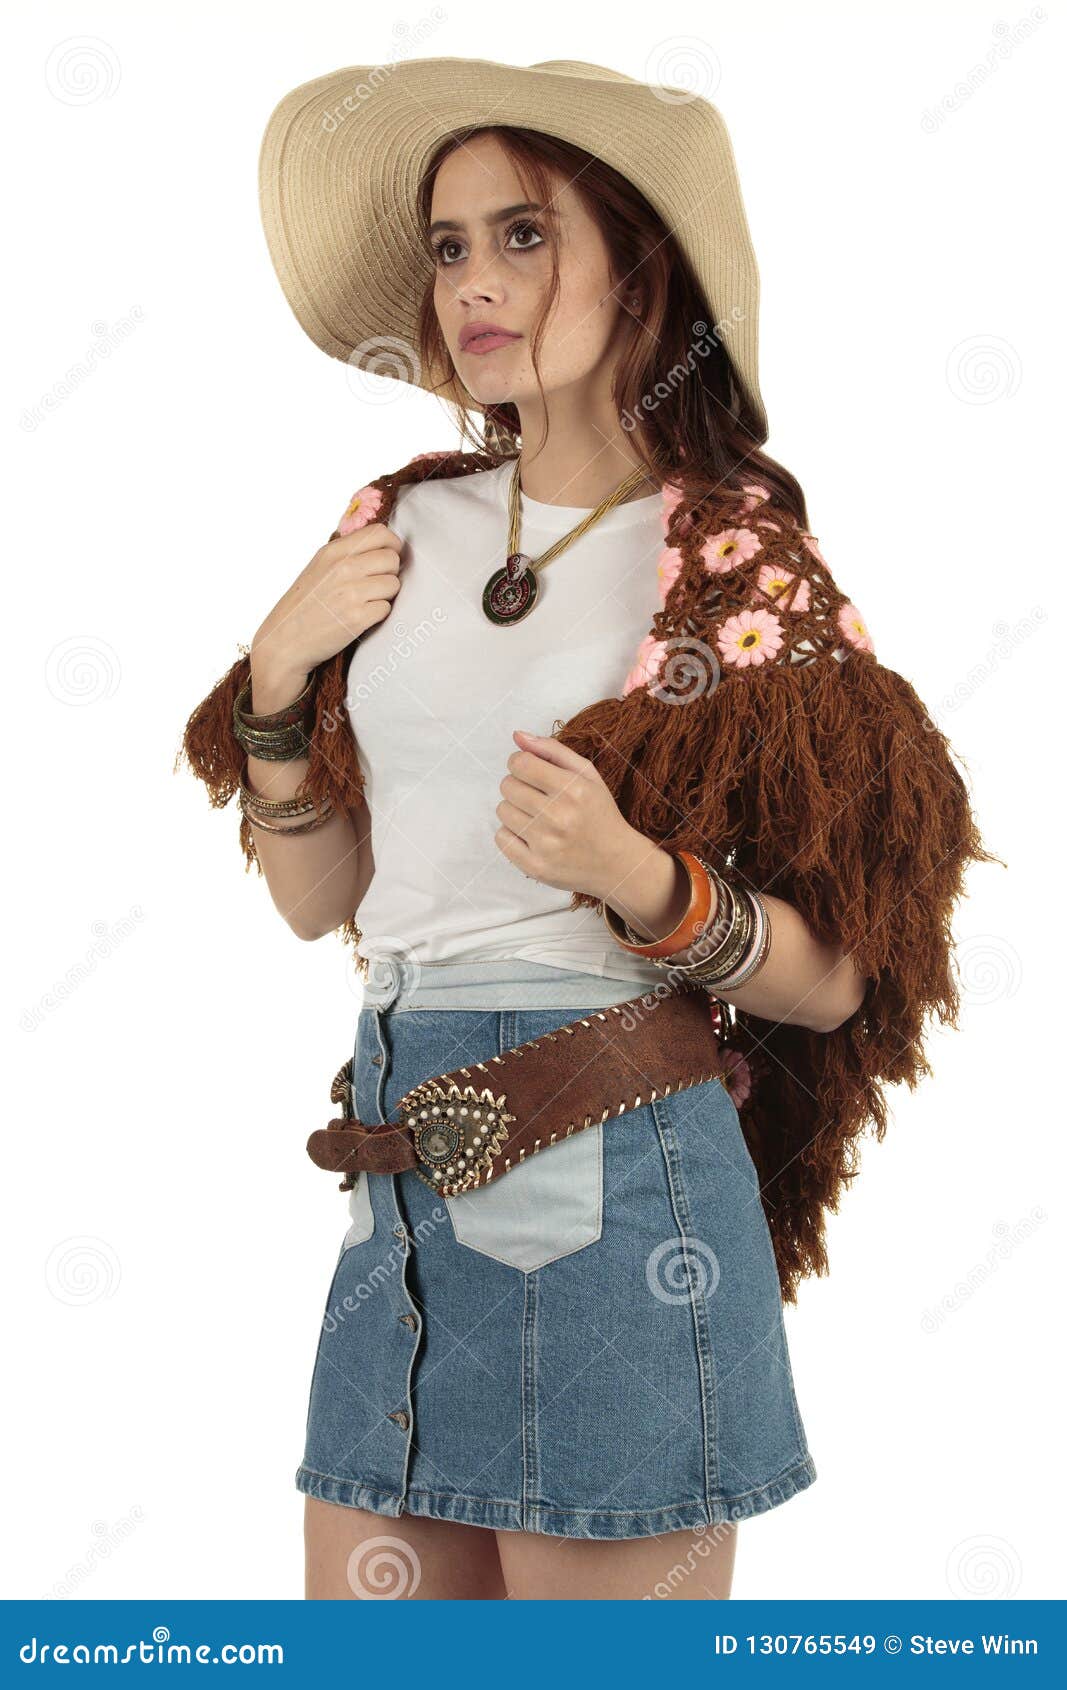 Bohemian Festival Style Attractive Model Wearing a Blank White T-shirt and Cowboy  Hat Stock Image - Image of happy, brunette: 130765549